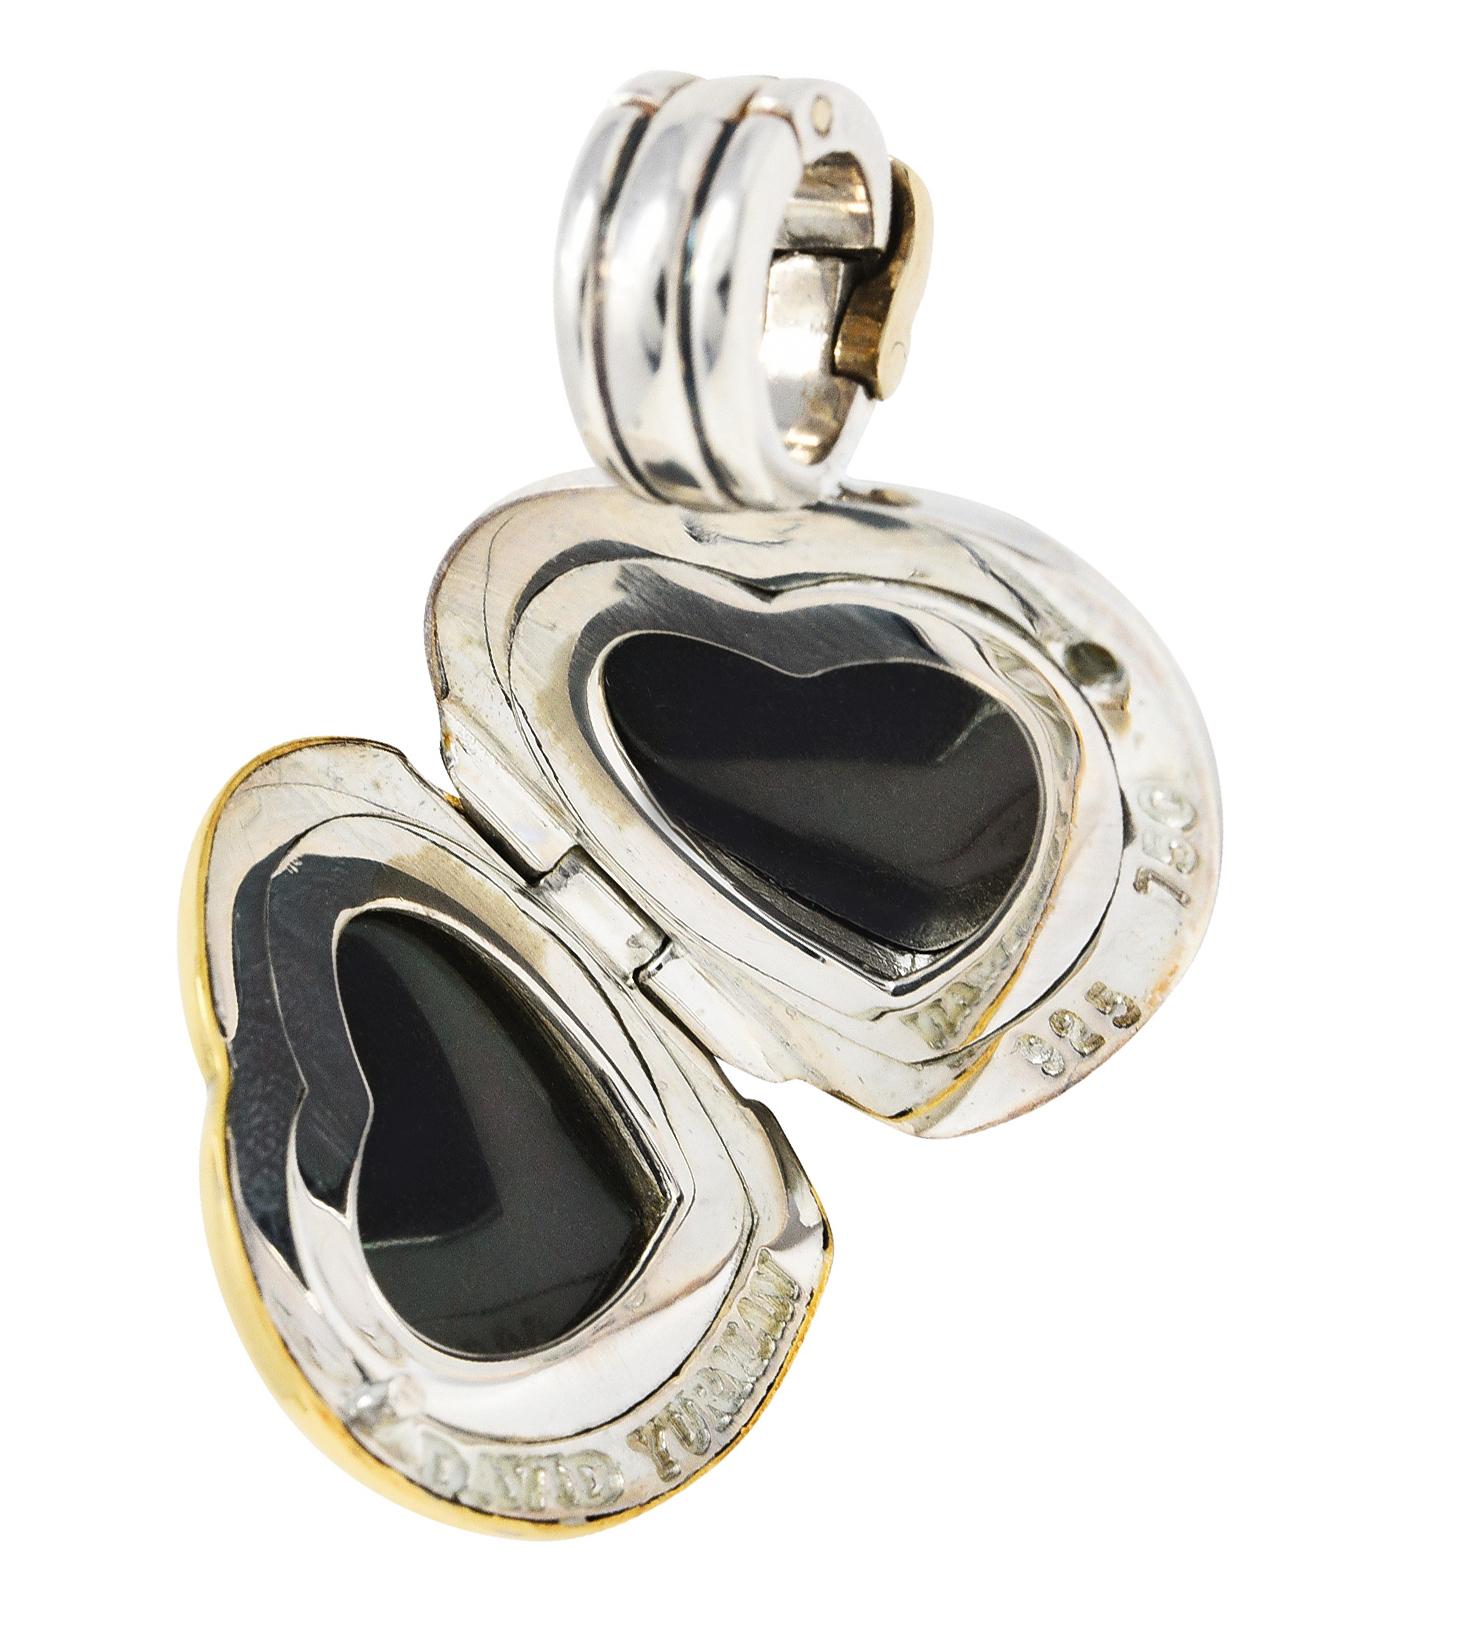 Designed as a highly polished locket centering silver cable motif with gold surround

Opens on a hinge to reveal two heart shaped recesses with plastic covers

Completed by hinged bale with locking mechanism

Stamped 750 and 925 for 18 karat gold